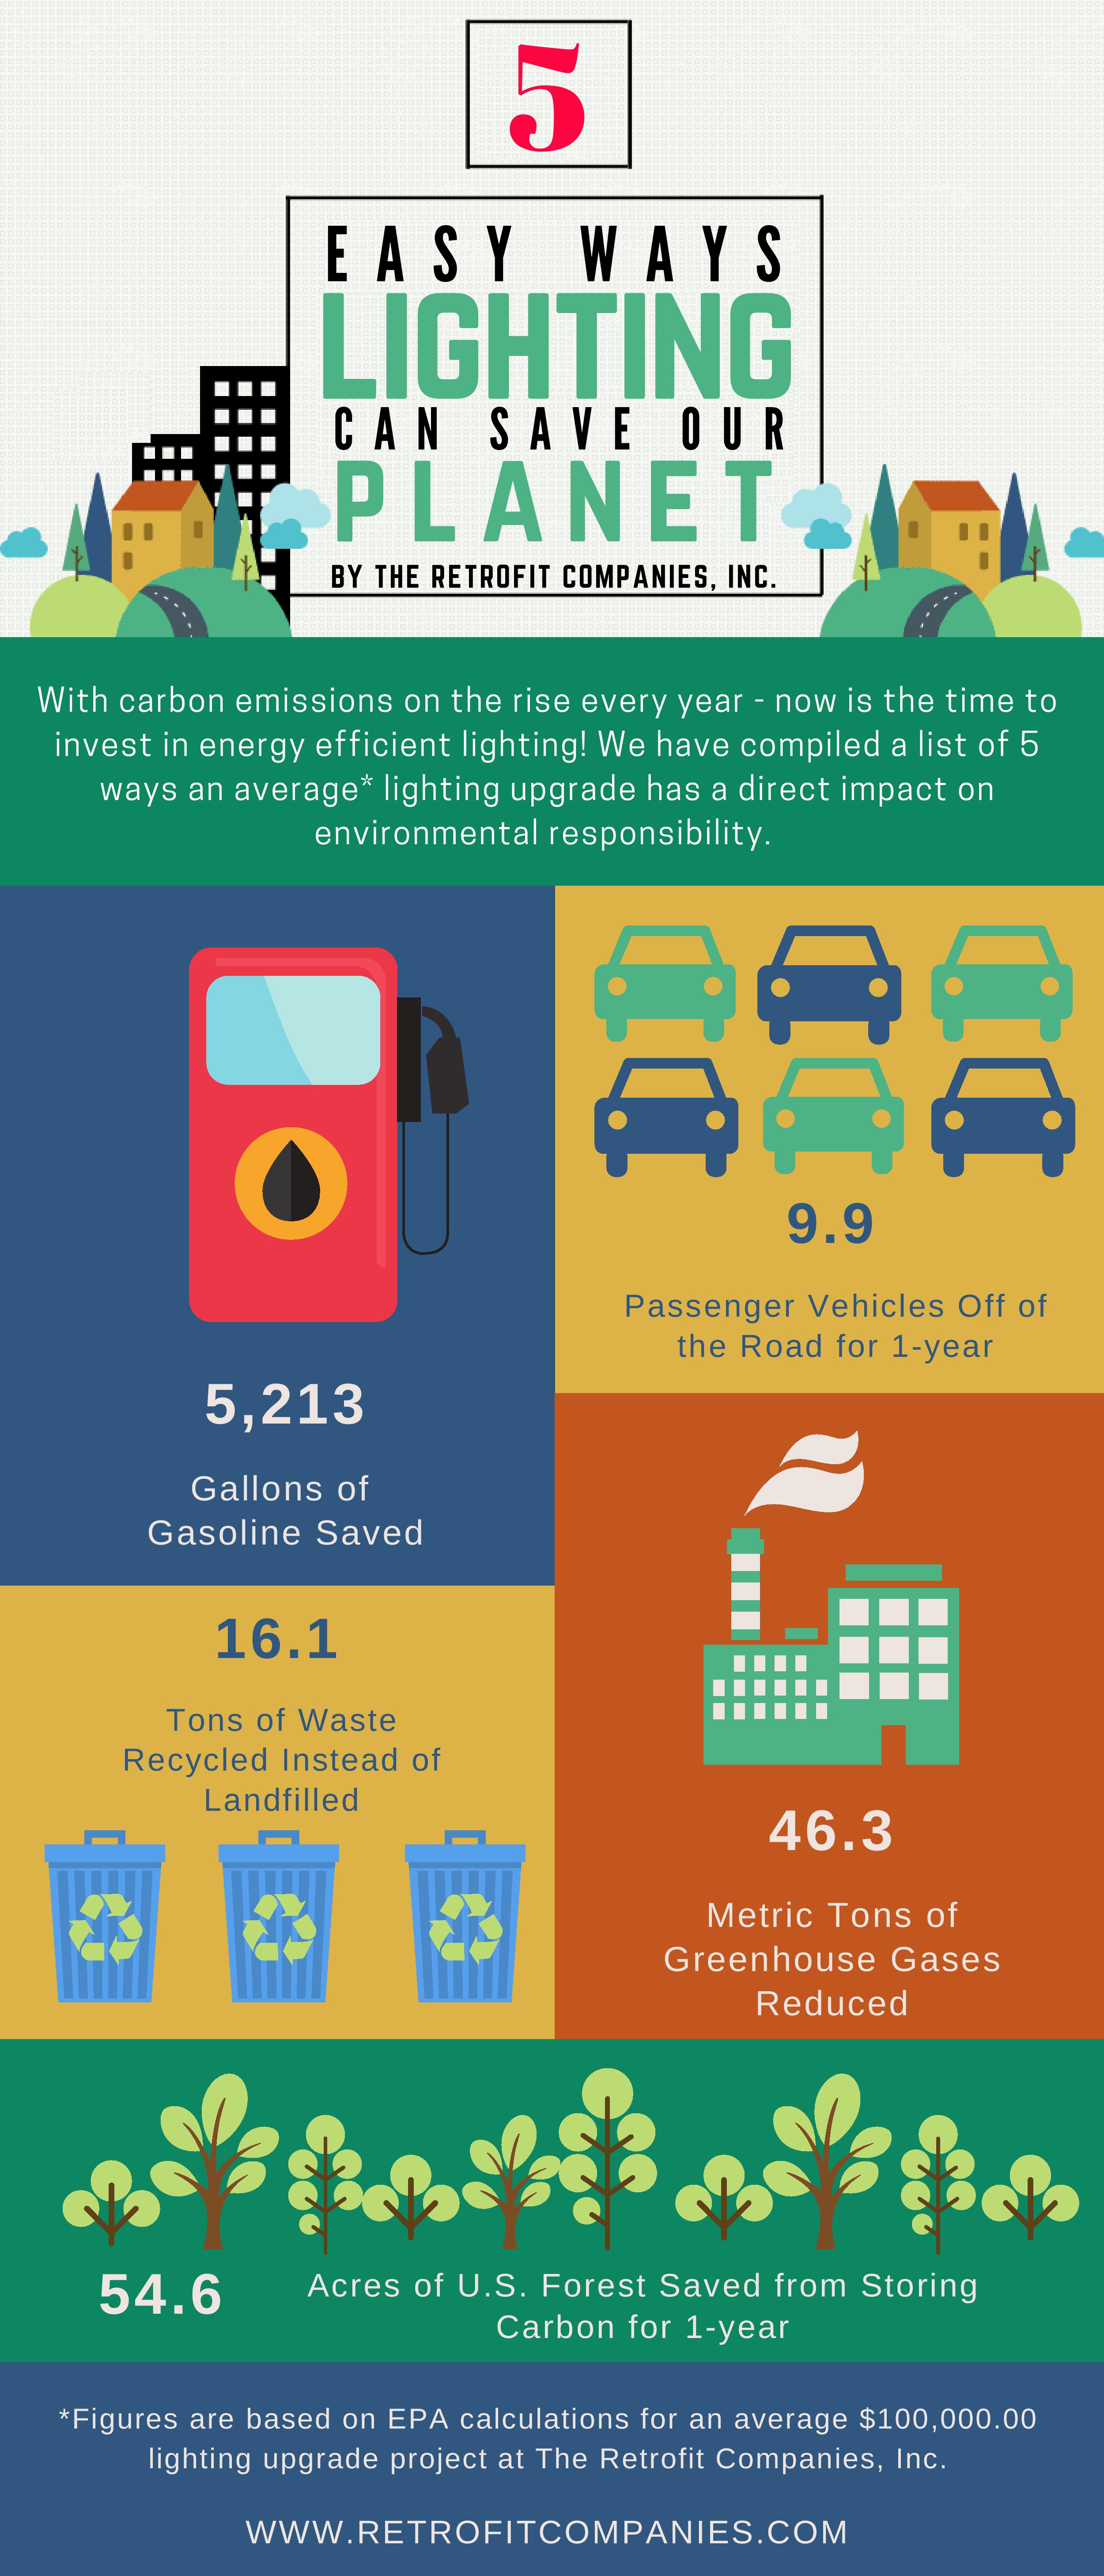 Lighting Can Save the Planet - Infographic